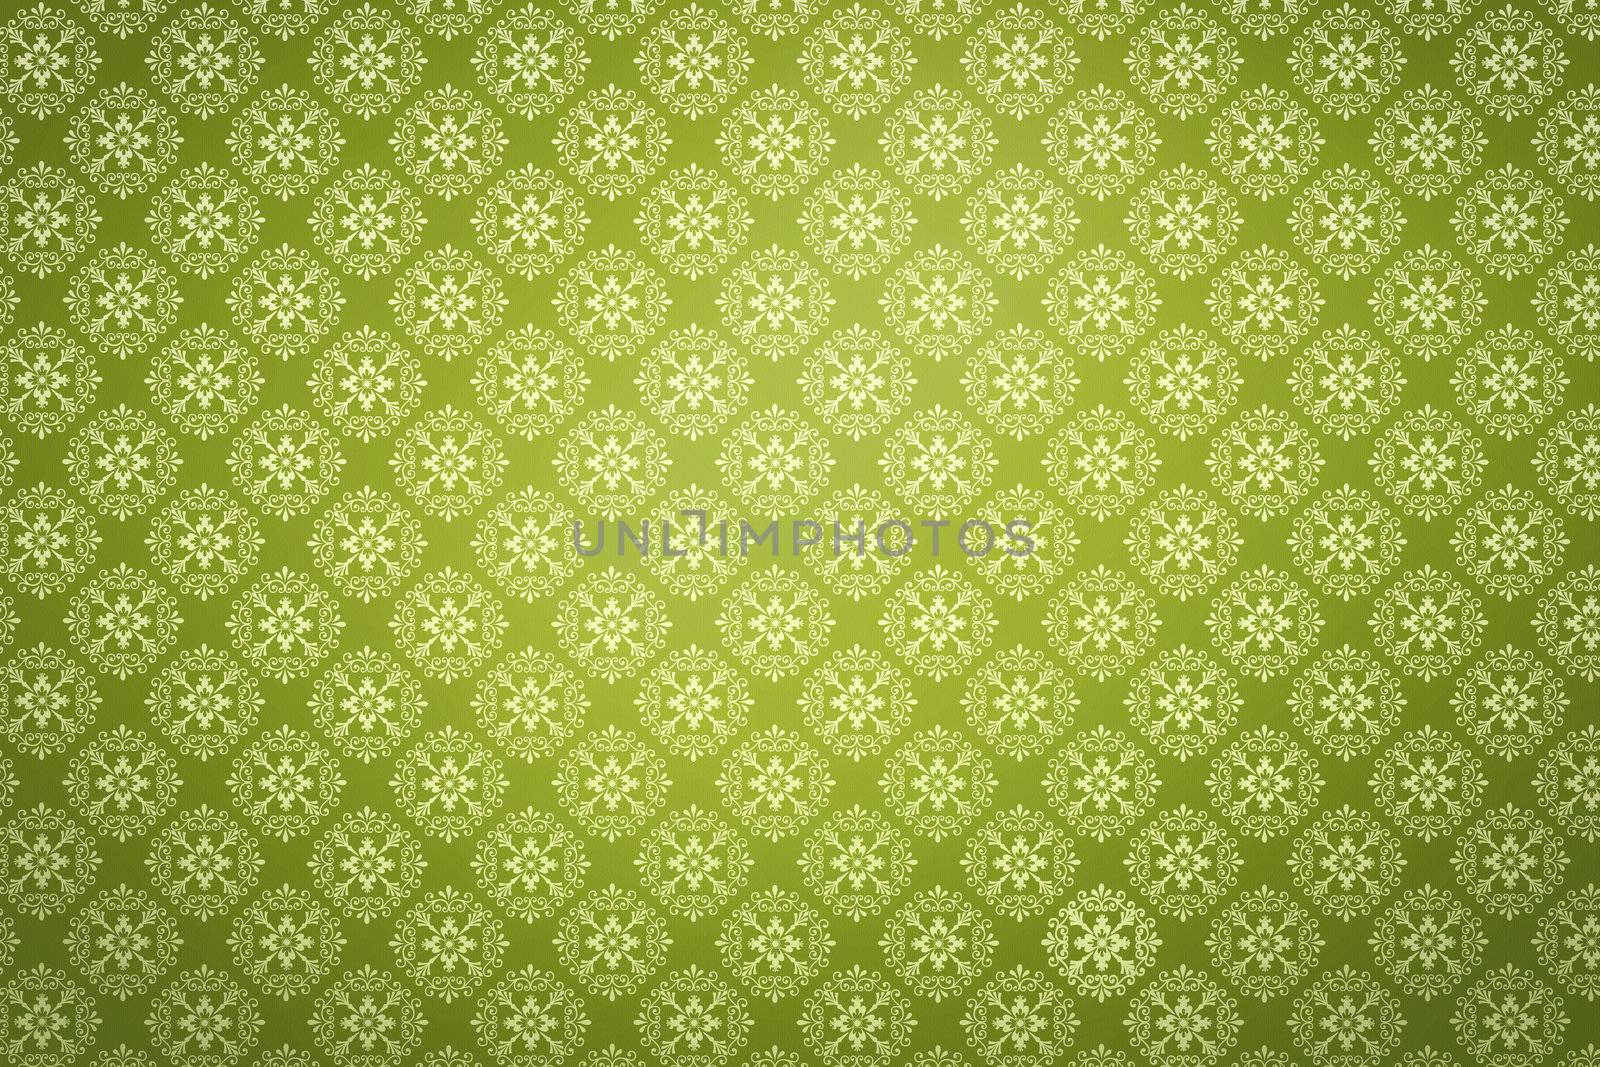 Repeating wallpaper on green background